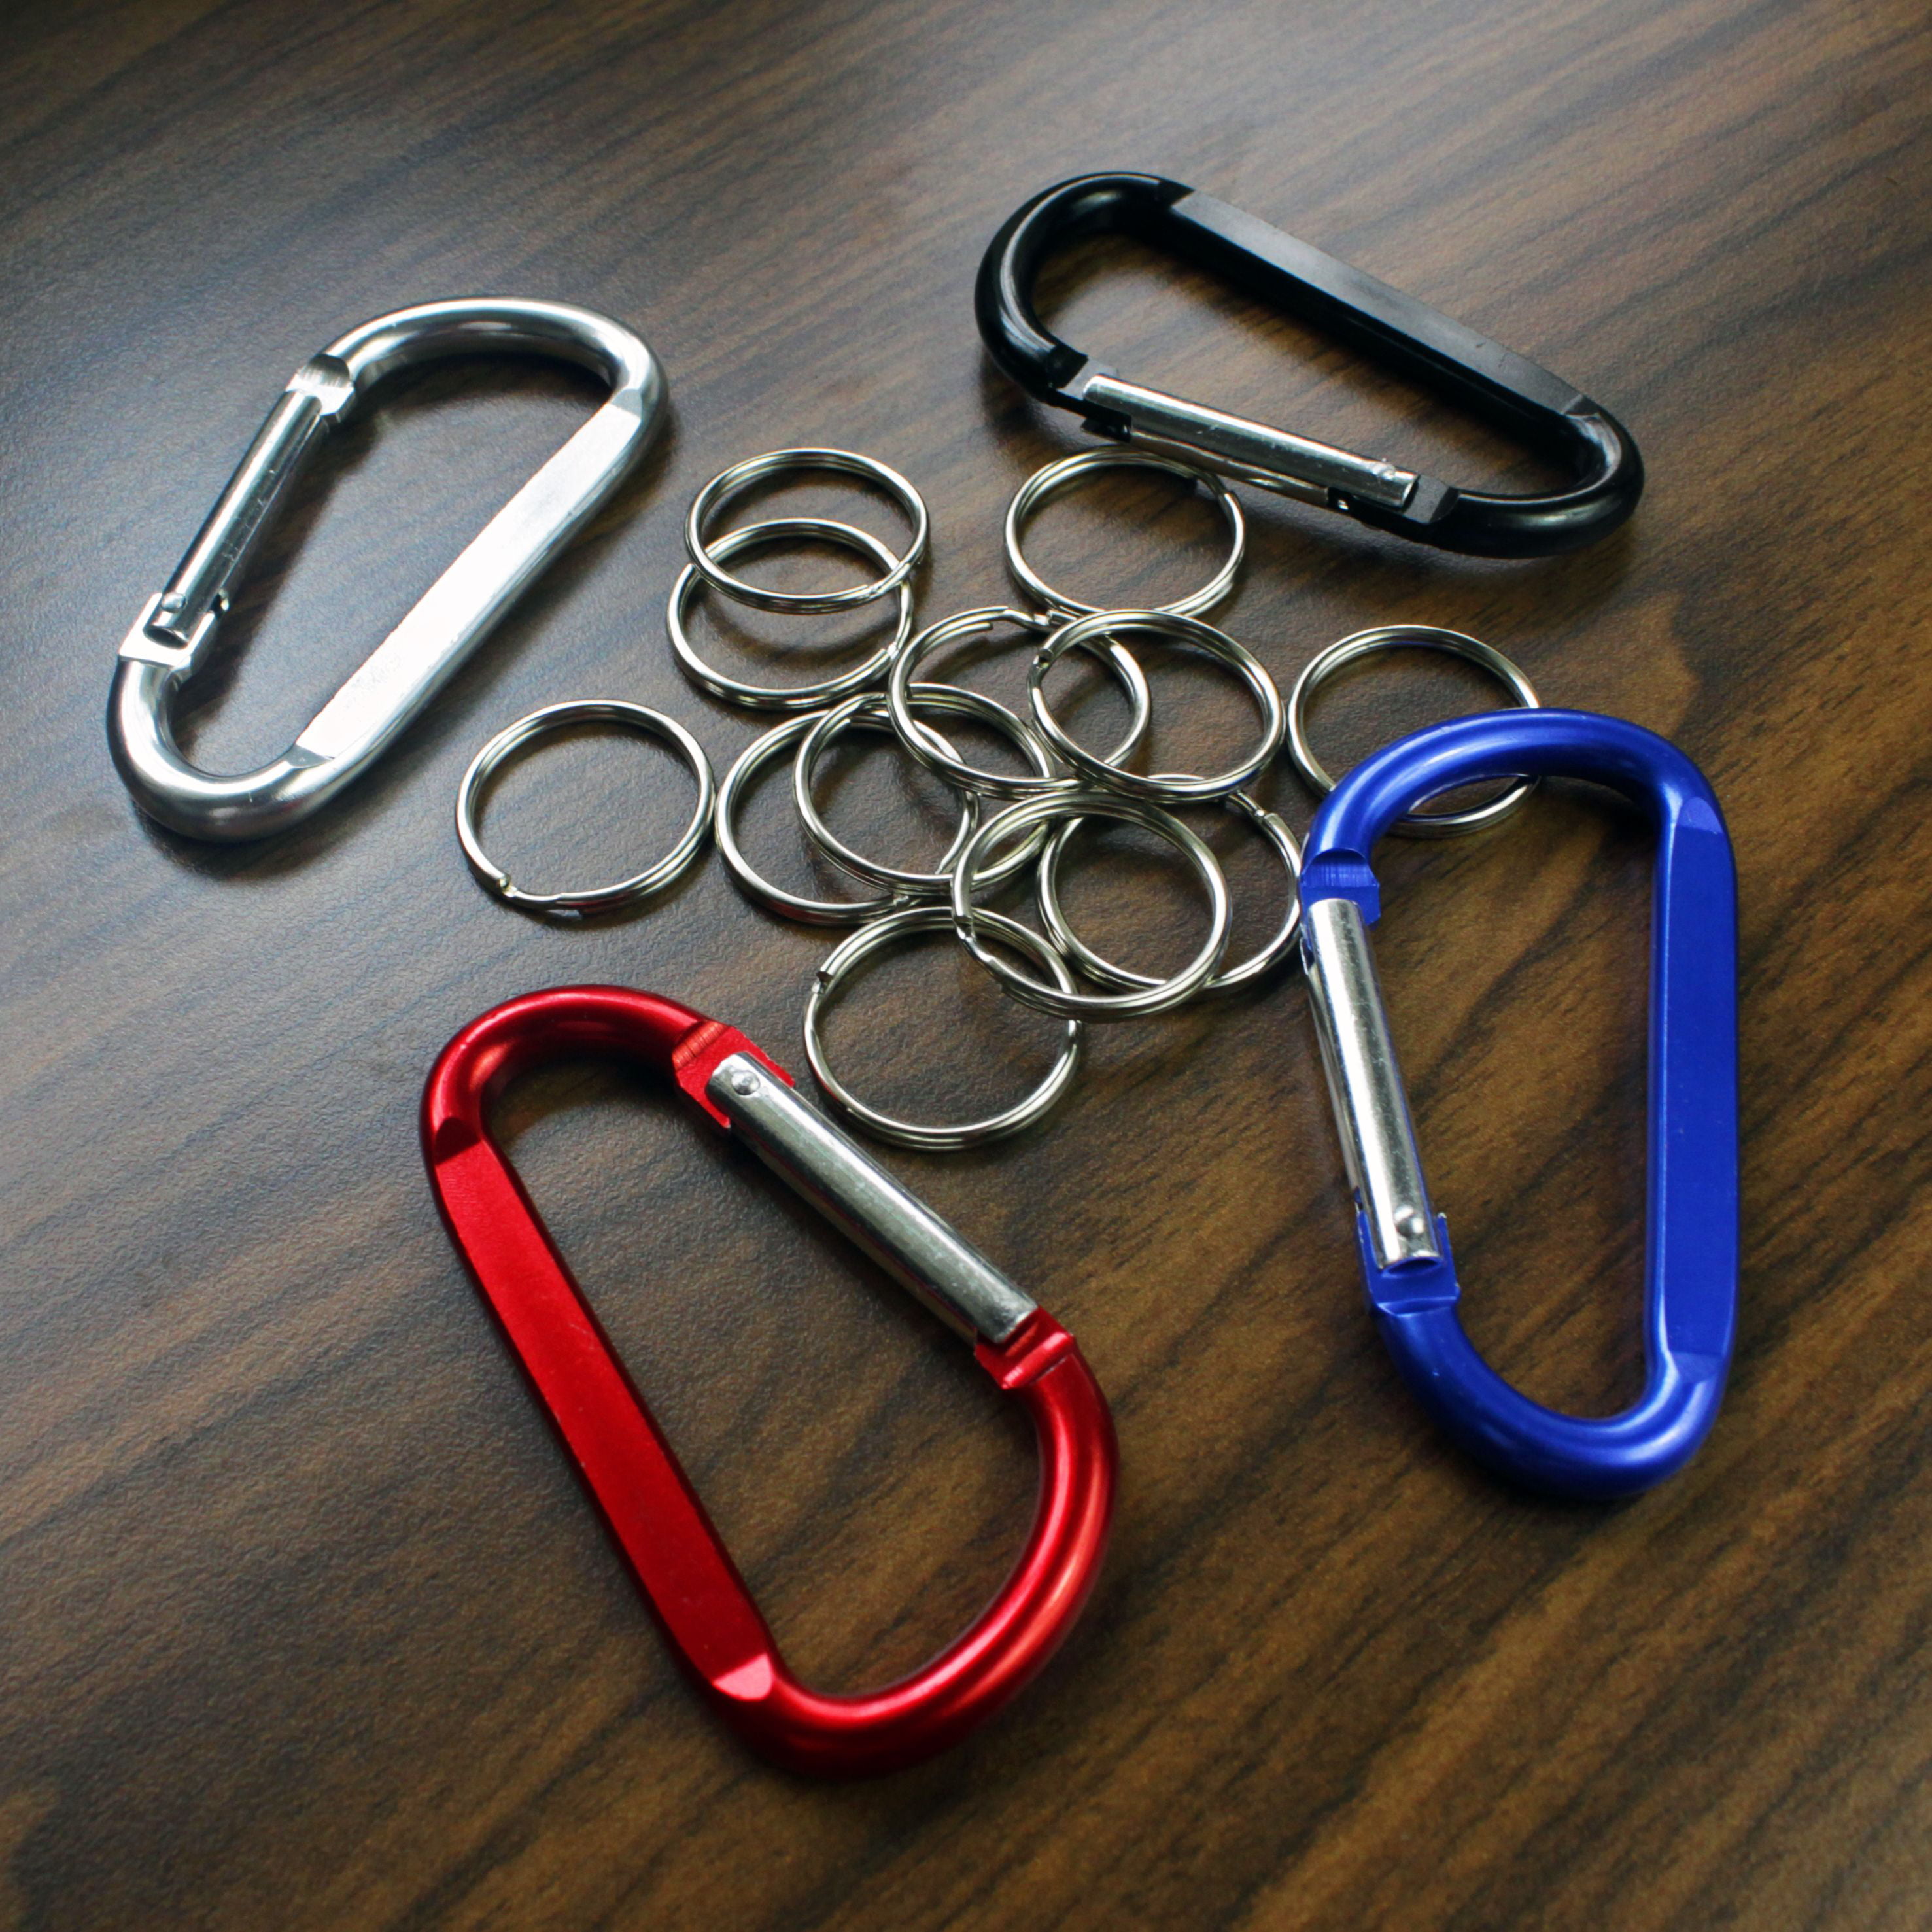 20pcs 2.4” Aluminium Carabiner Clip, Durable Spring-loaded Gate Keychain  Hook Pear Shape for Home, RV, Camping, Hiking, Fishing or Traveling